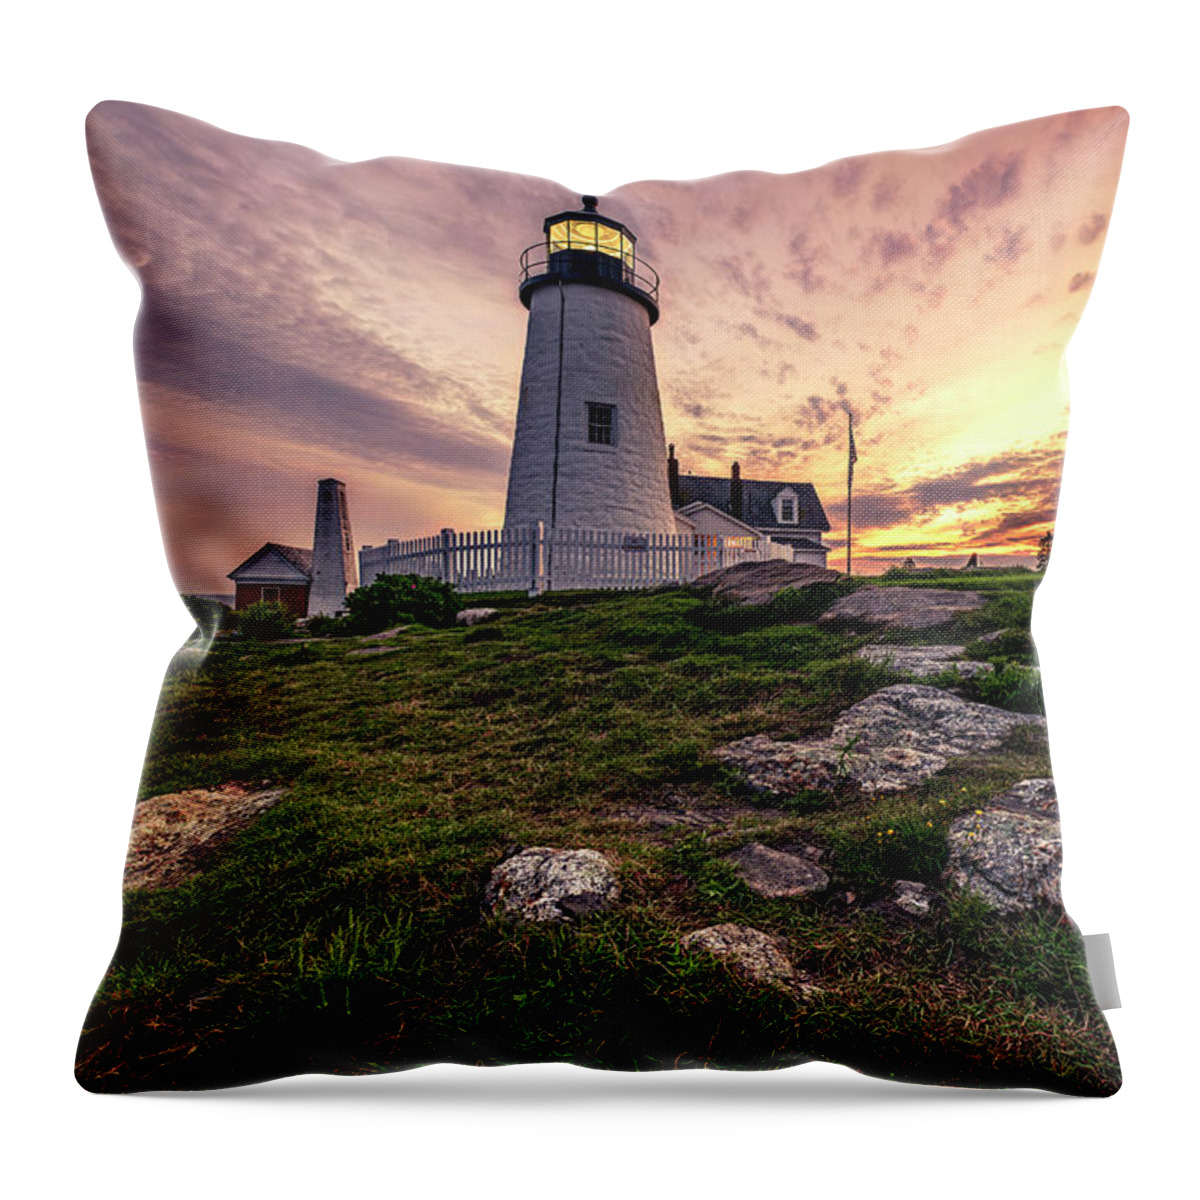 Architecture Throw Pillow featuring the photograph Twilight at Penaquid Point Lighthouse by Andy Crawford